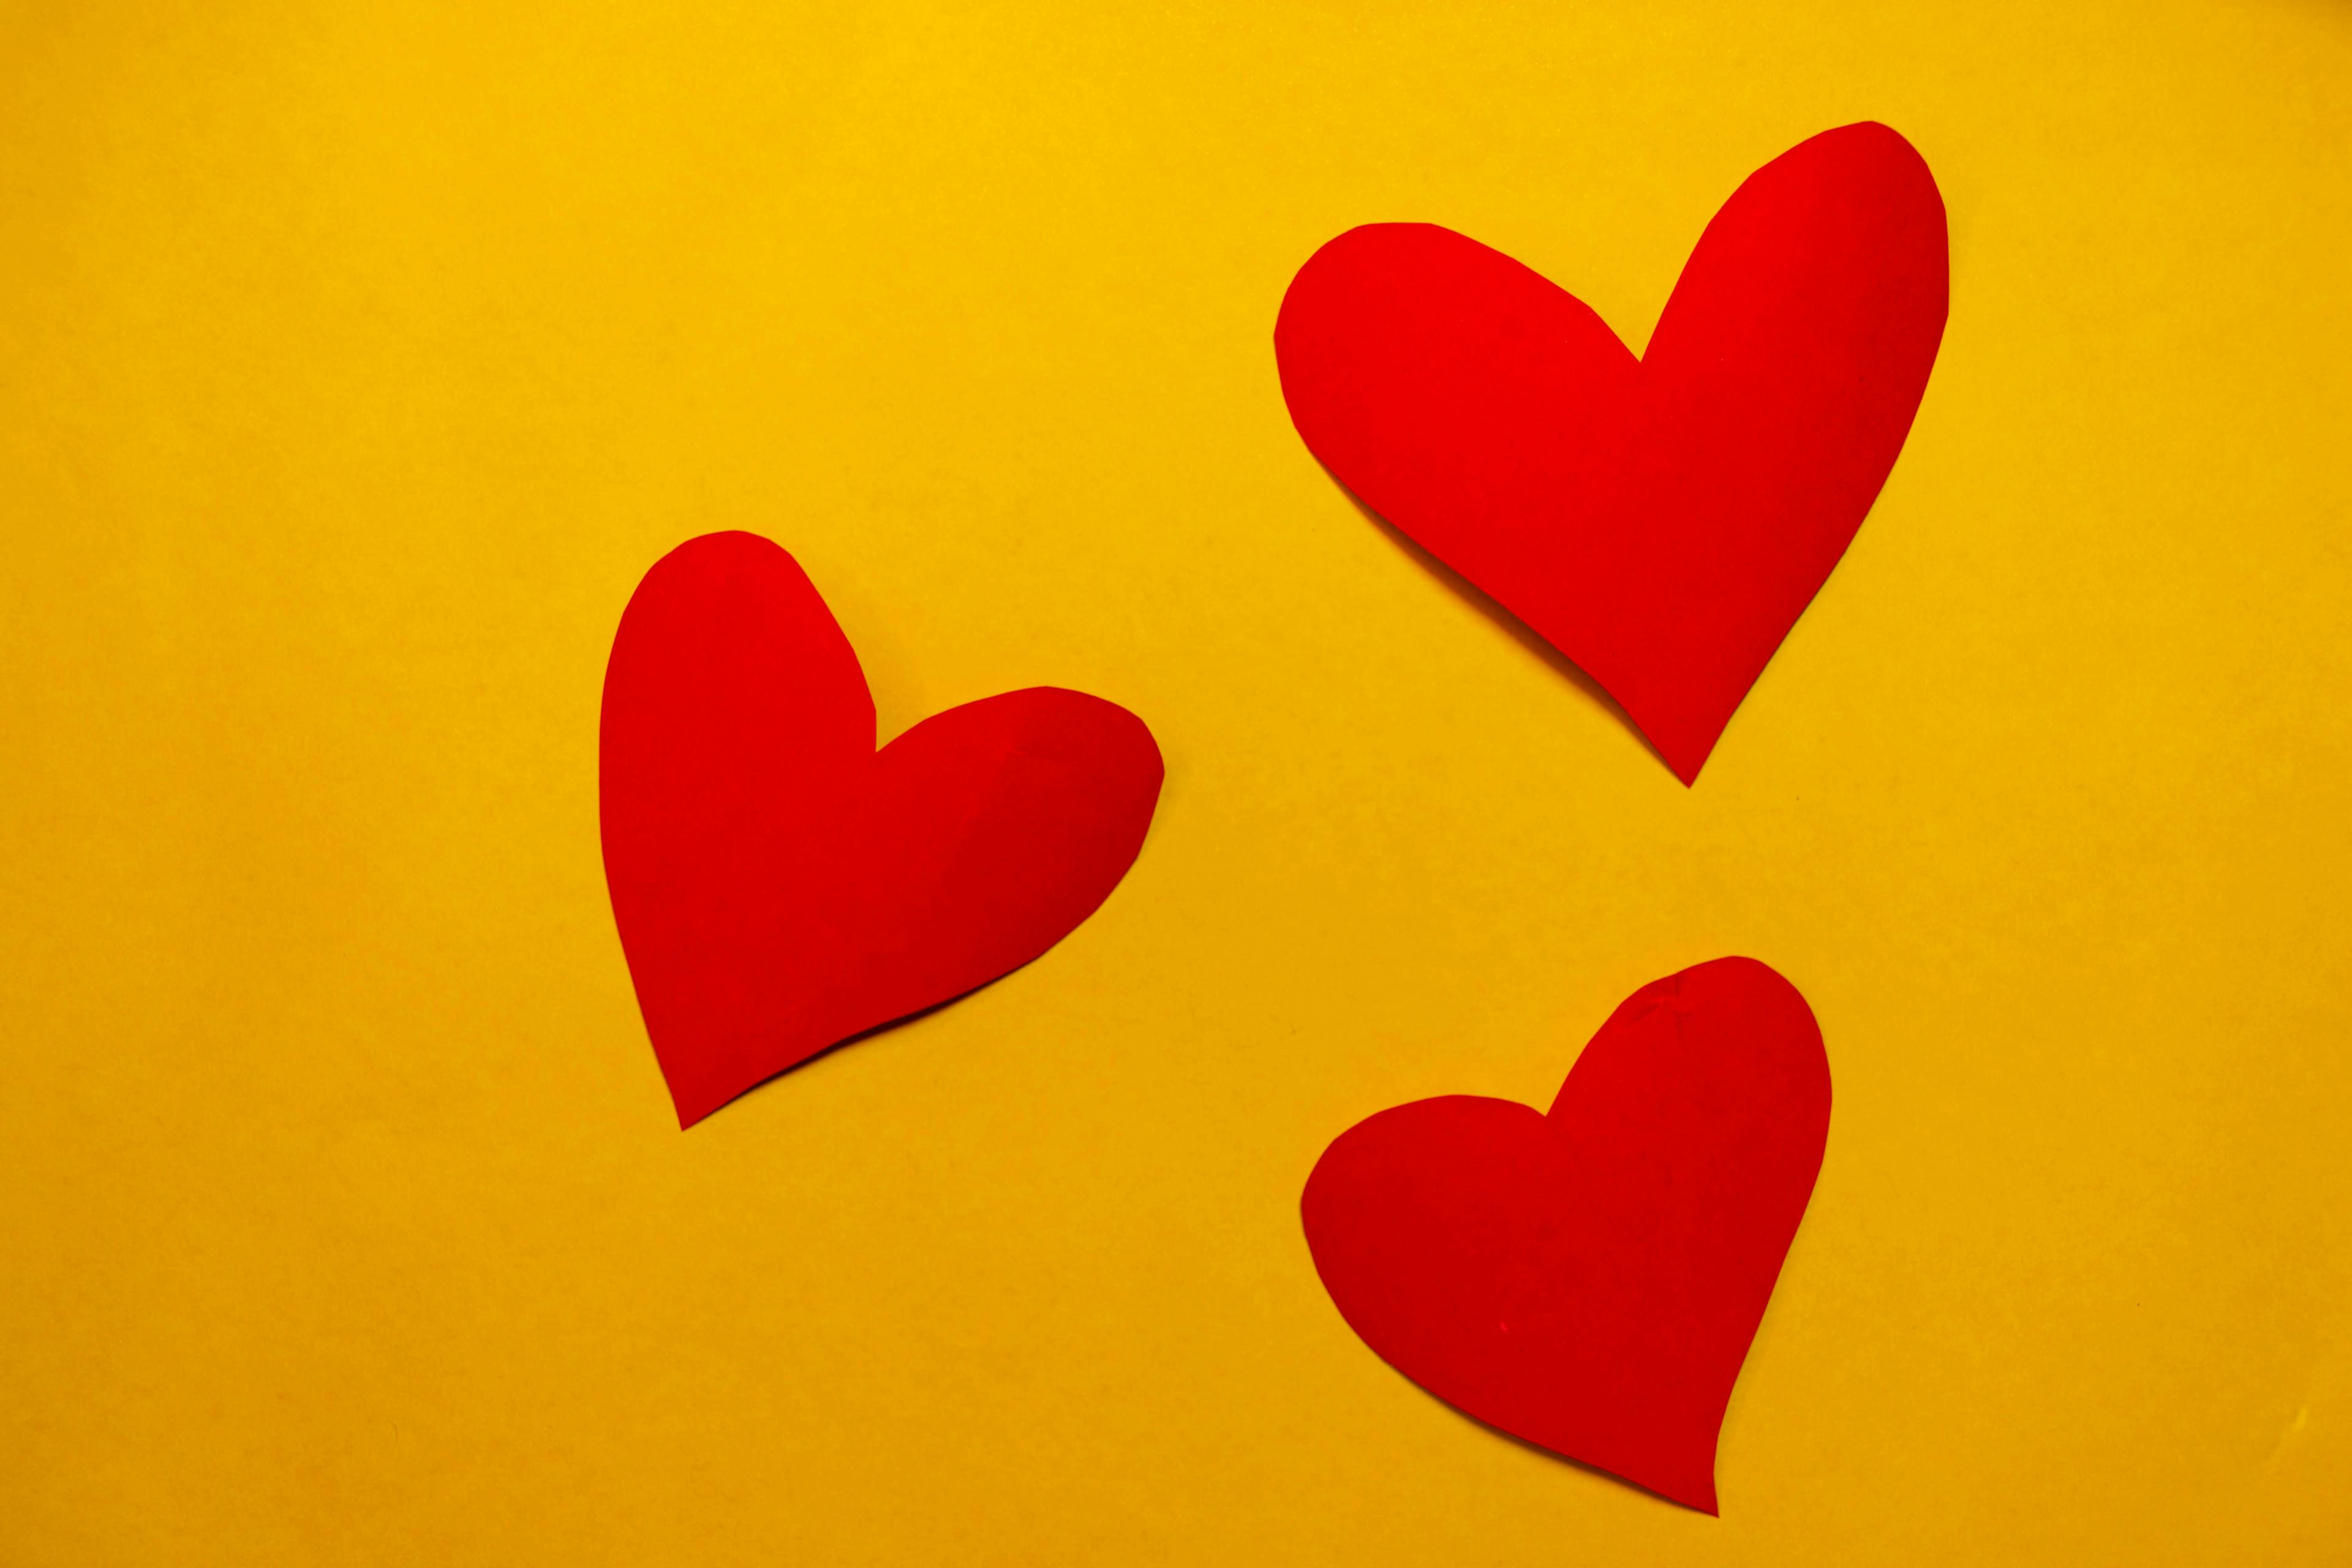 Red hearts on a yellow background